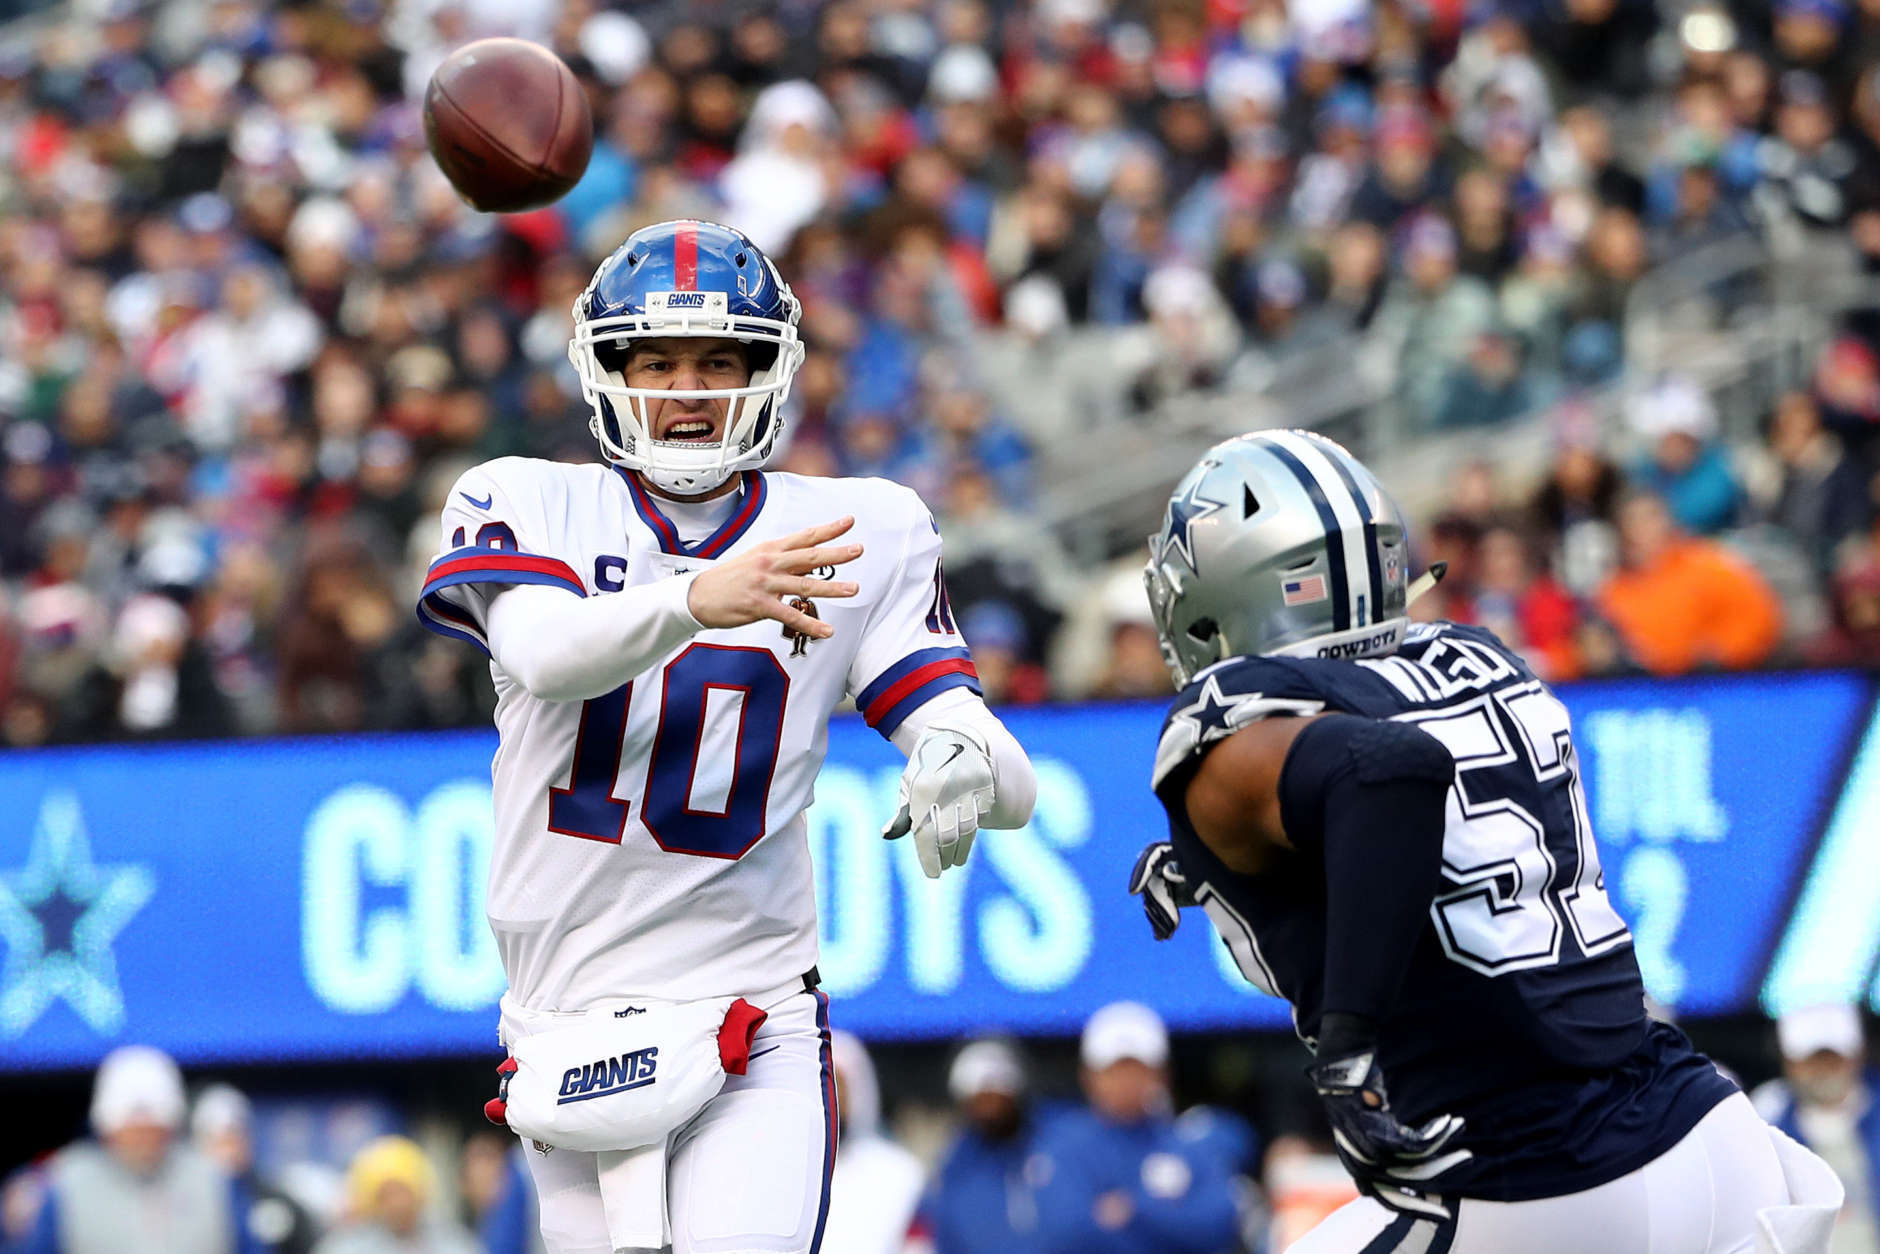 EAST RUTHERFORD, NEW JERSEY - DECEMBER 10:  Eli Manning #10 of the New York Giants throws a pass against the Dallas Cowboys during the second quarter in the game at MetLife Stadium on December 10, 2017 in East Rutherford, New Jersey. (Photo by Elsa/Getty Images)